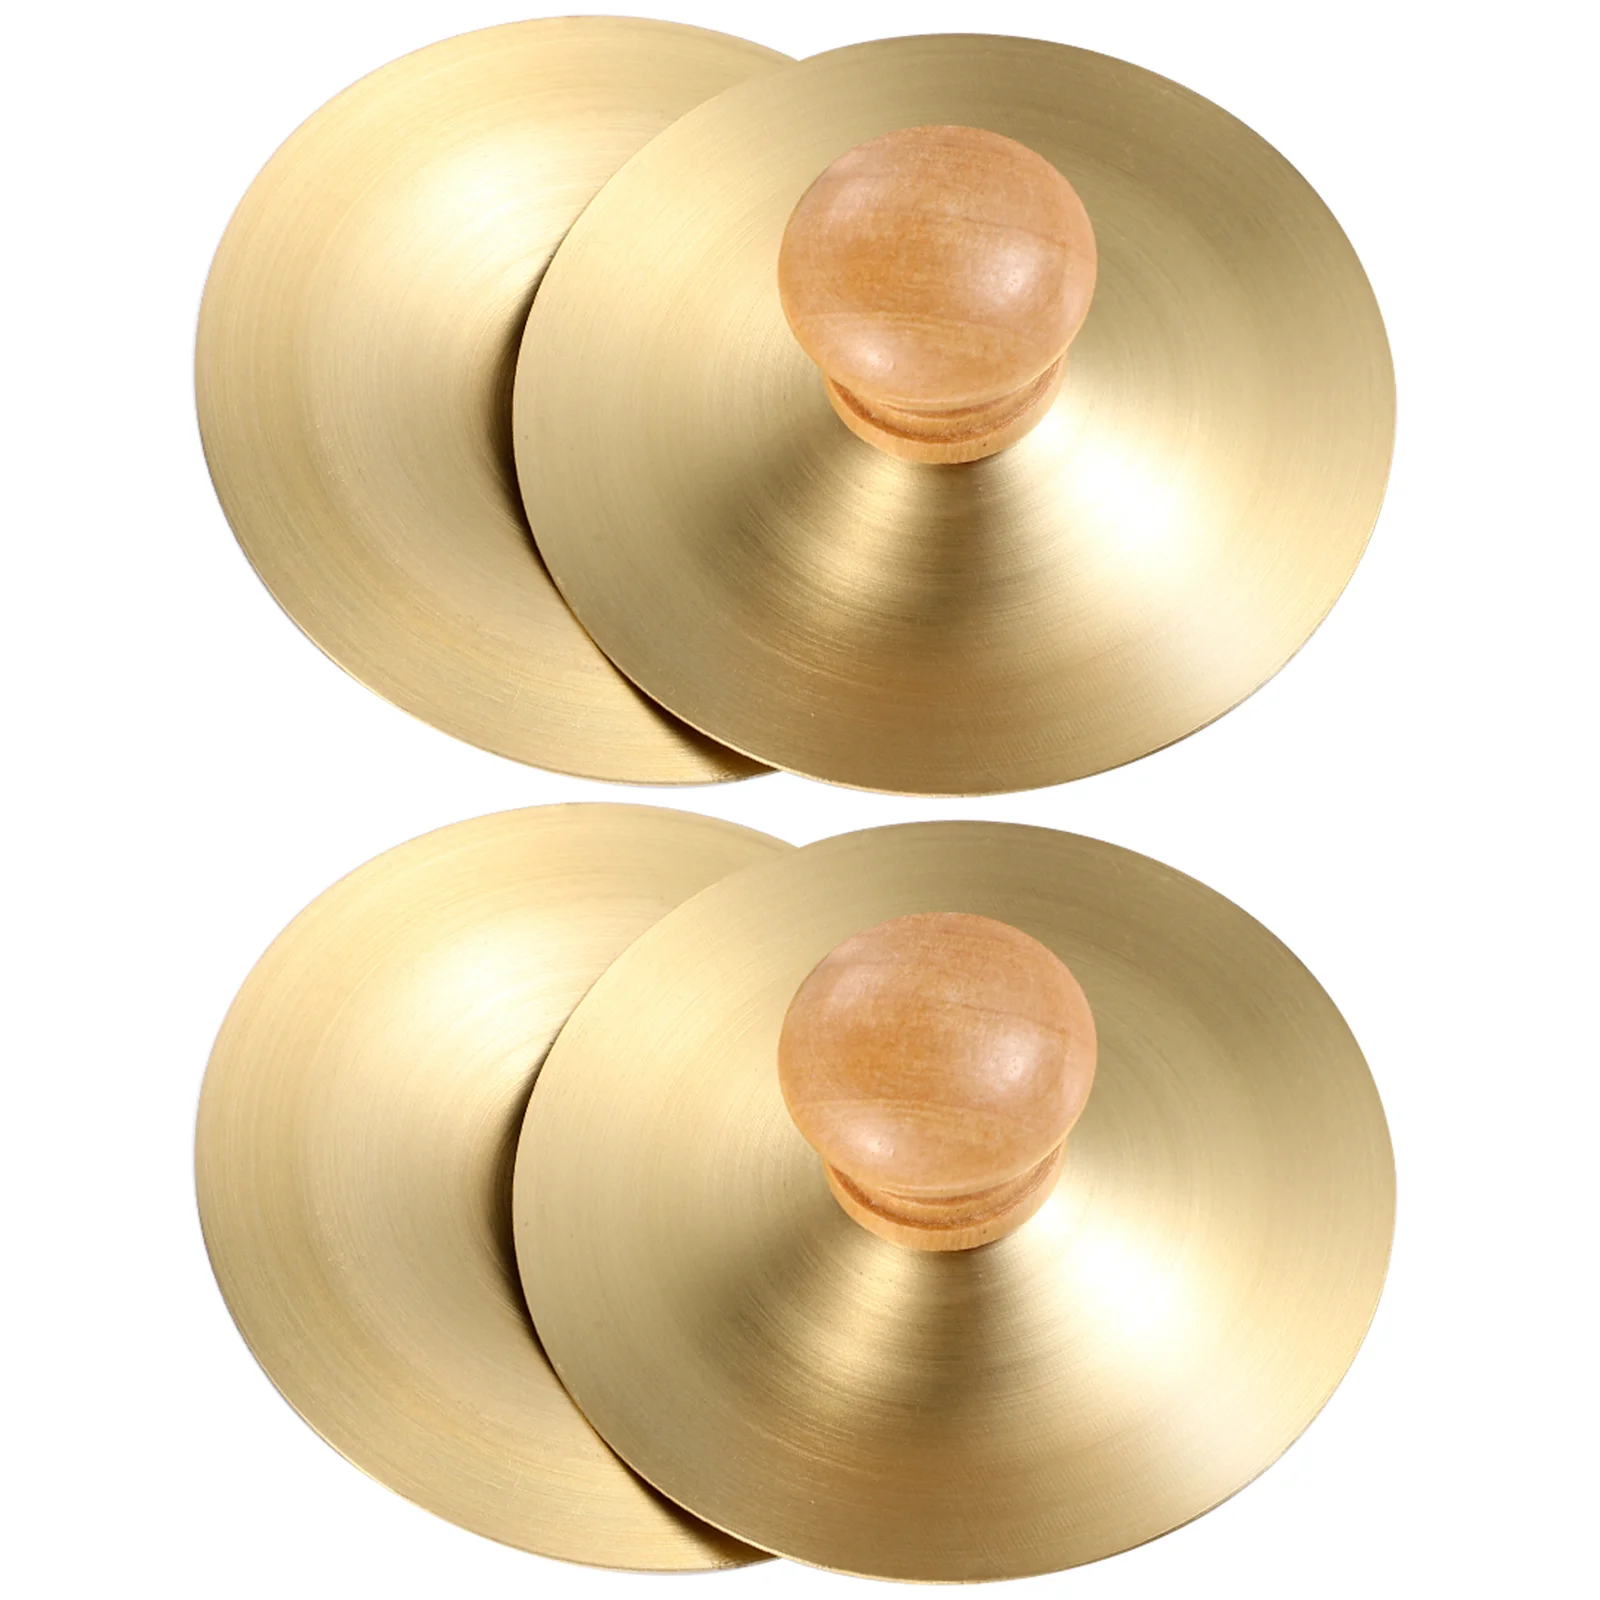 

Finger Cymbals Cymbal Copper Dance Belly Instrument Zills Musical Mini Toy Kids Crash Hand Music Ladies Costume Bowls Singing